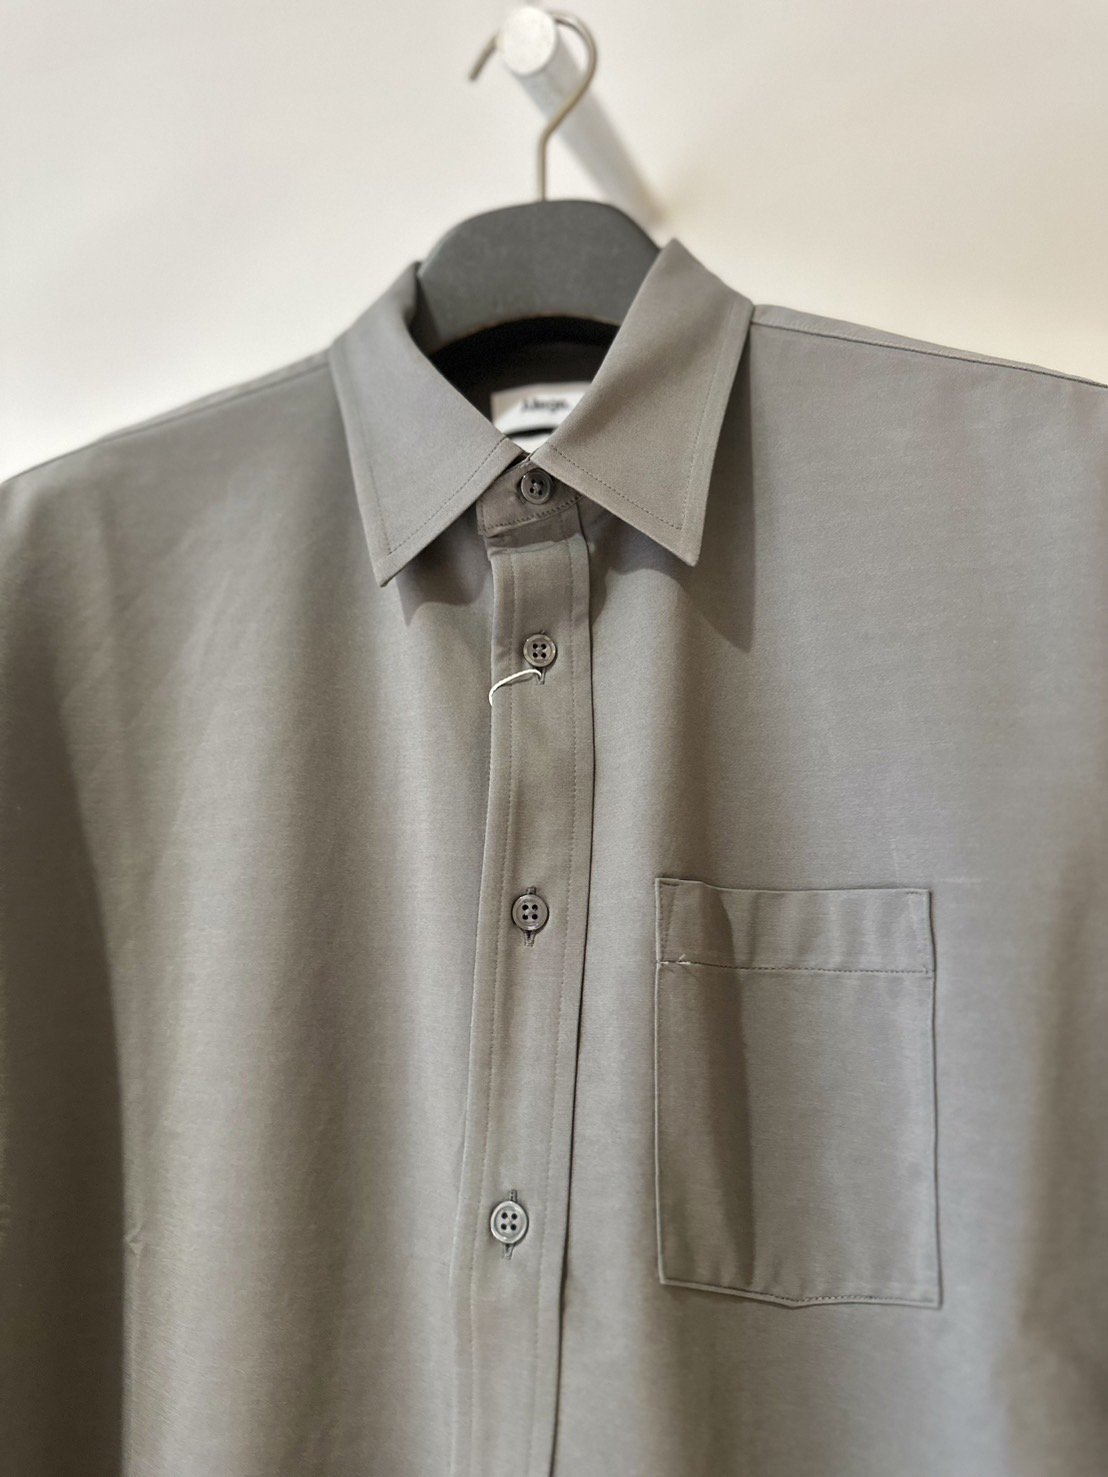 ALLEGE<br />AllegeKANEMASA Standaed Shirt / Gray<img class='new_mark_img2' src='https://img.shop-pro.jp/img/new/icons14.gif' style='border:none;display:inline;margin:0px;padding:0px;width:auto;' />